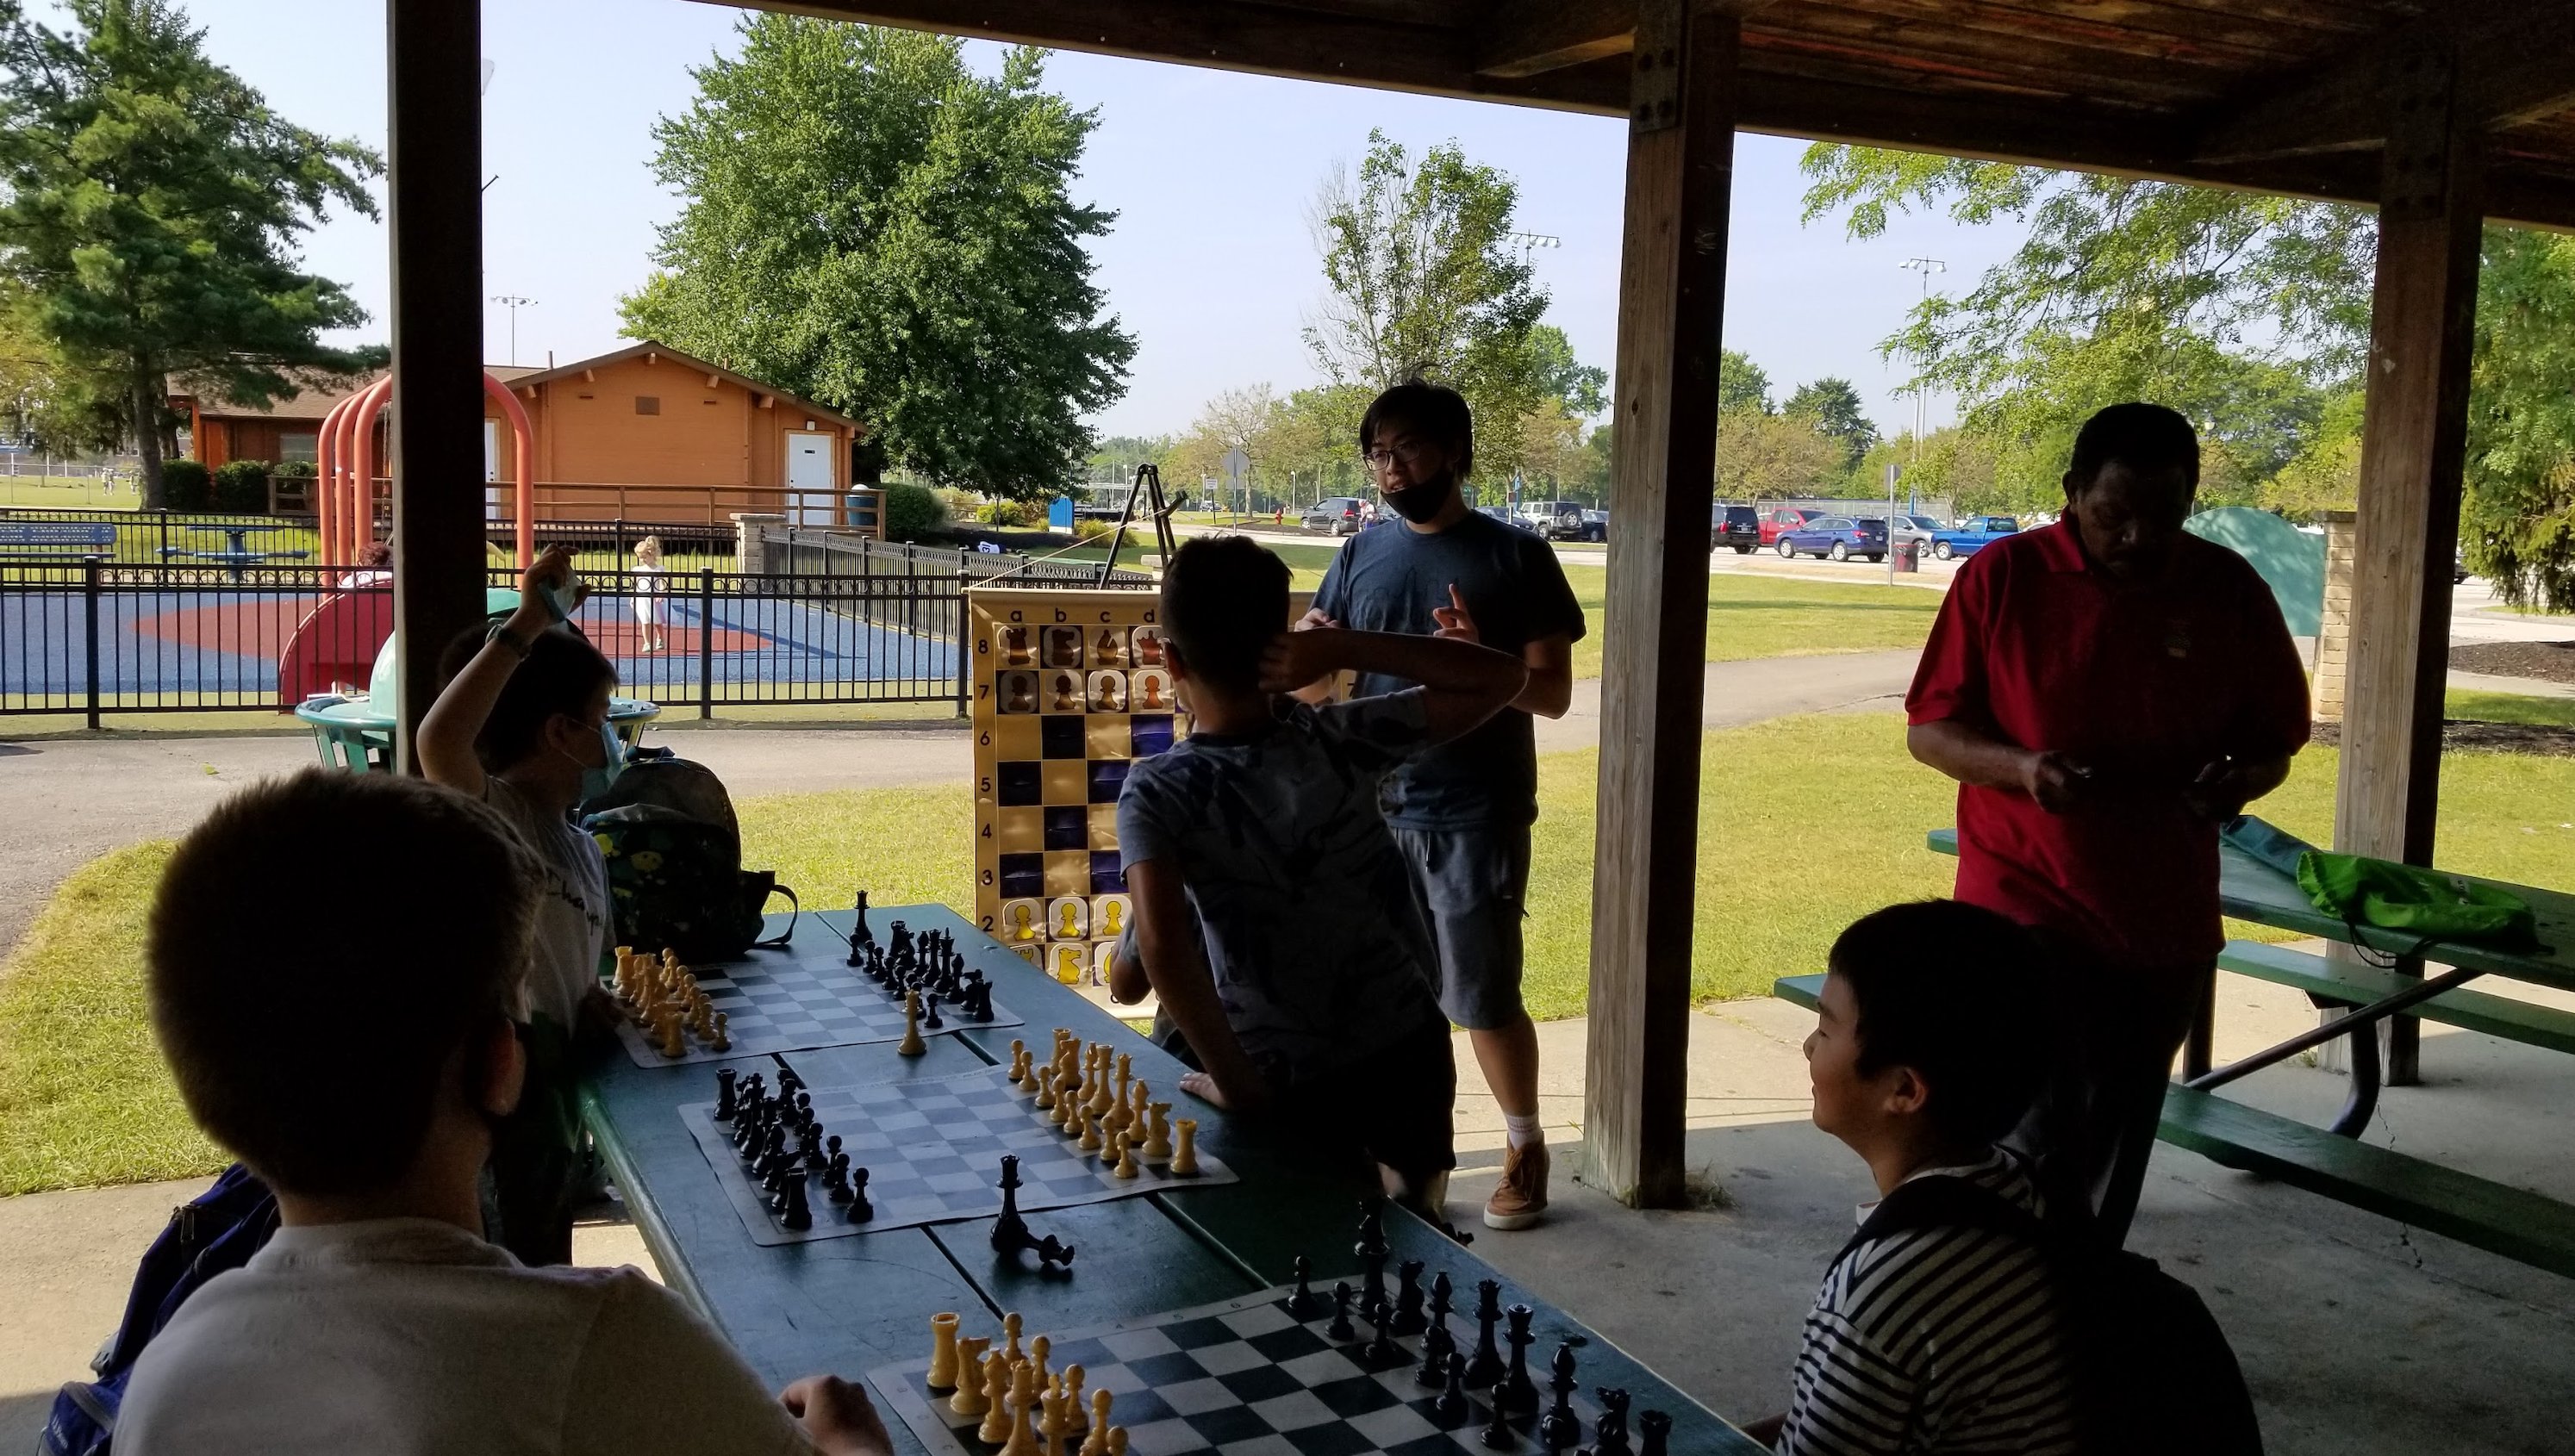 The Eastside Chess Tournament » Progress With Chess